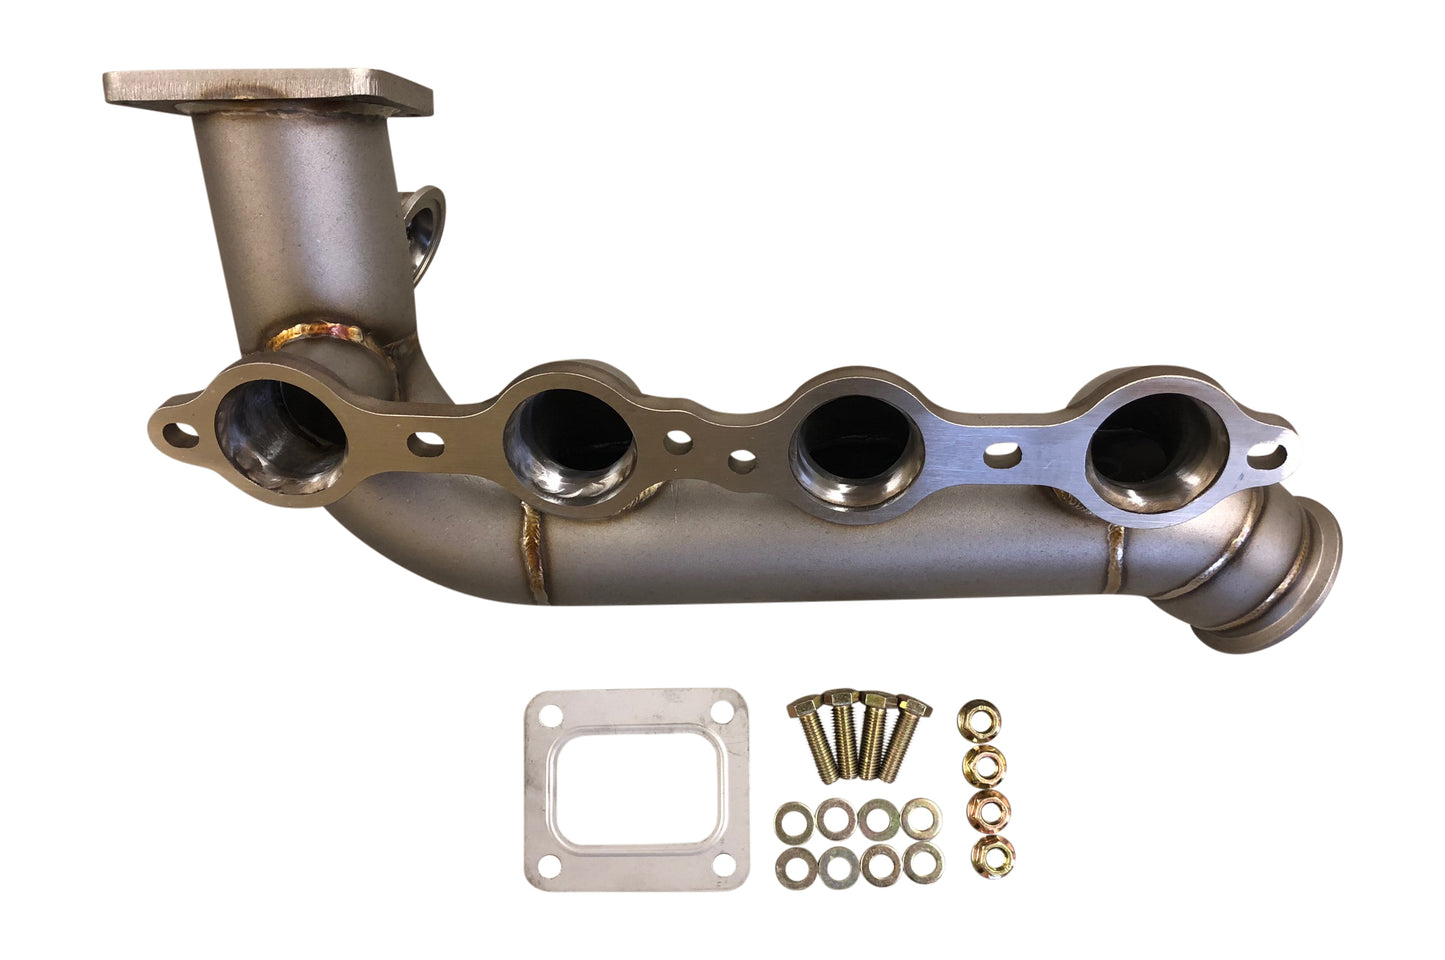 *New* Huron Speed V4 99-13 GM 1500 Manifold Only - T4